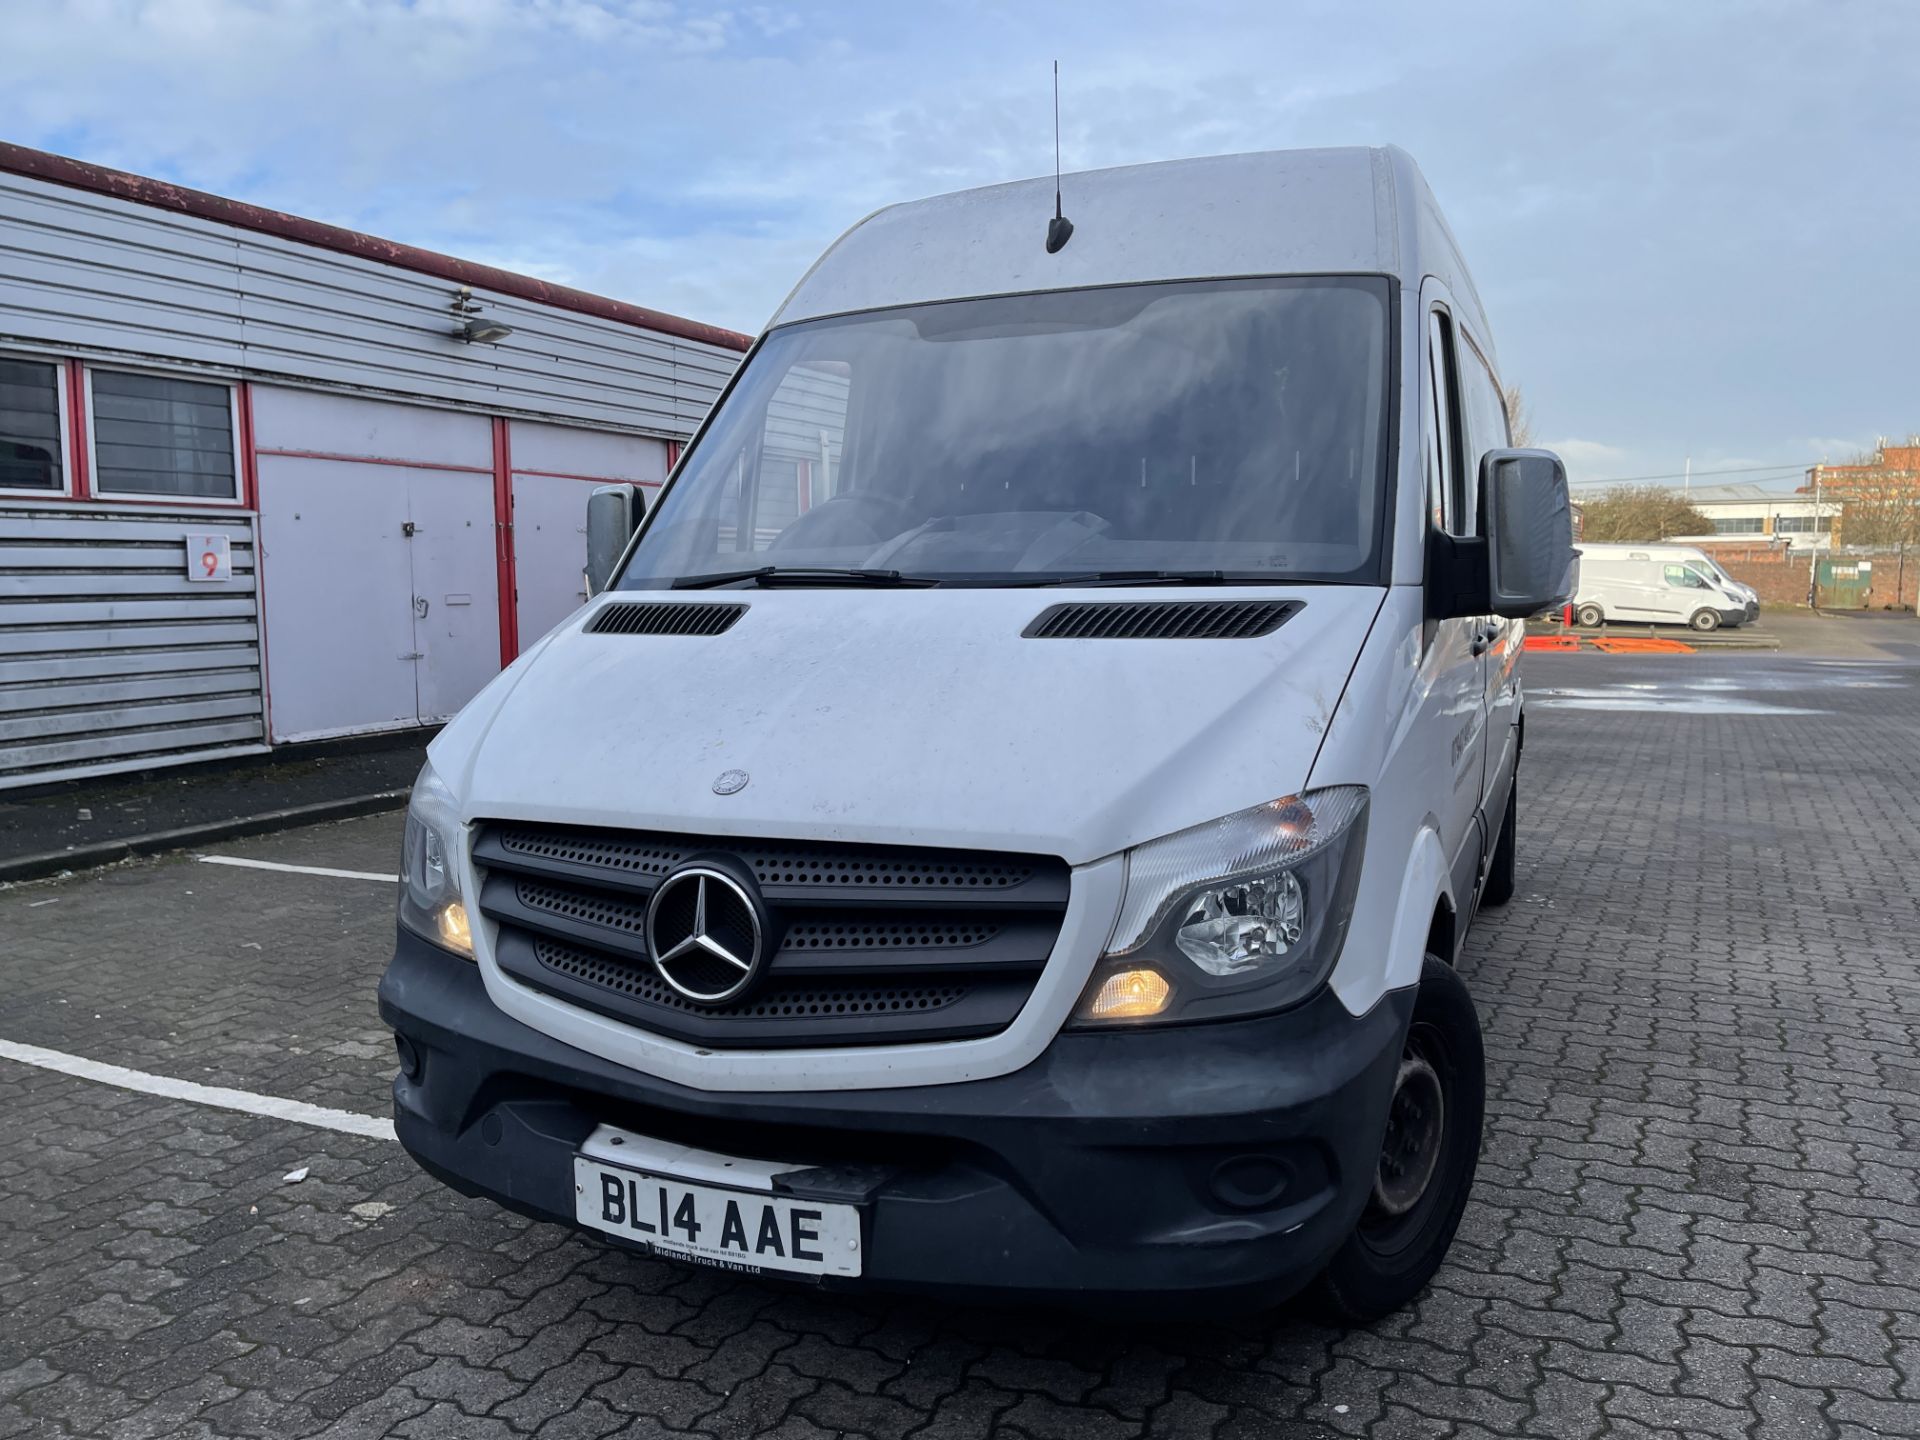 2014 - Mercedes Sprinter MWB - Facelift Model - Low Miles for Age - Image 16 of 39